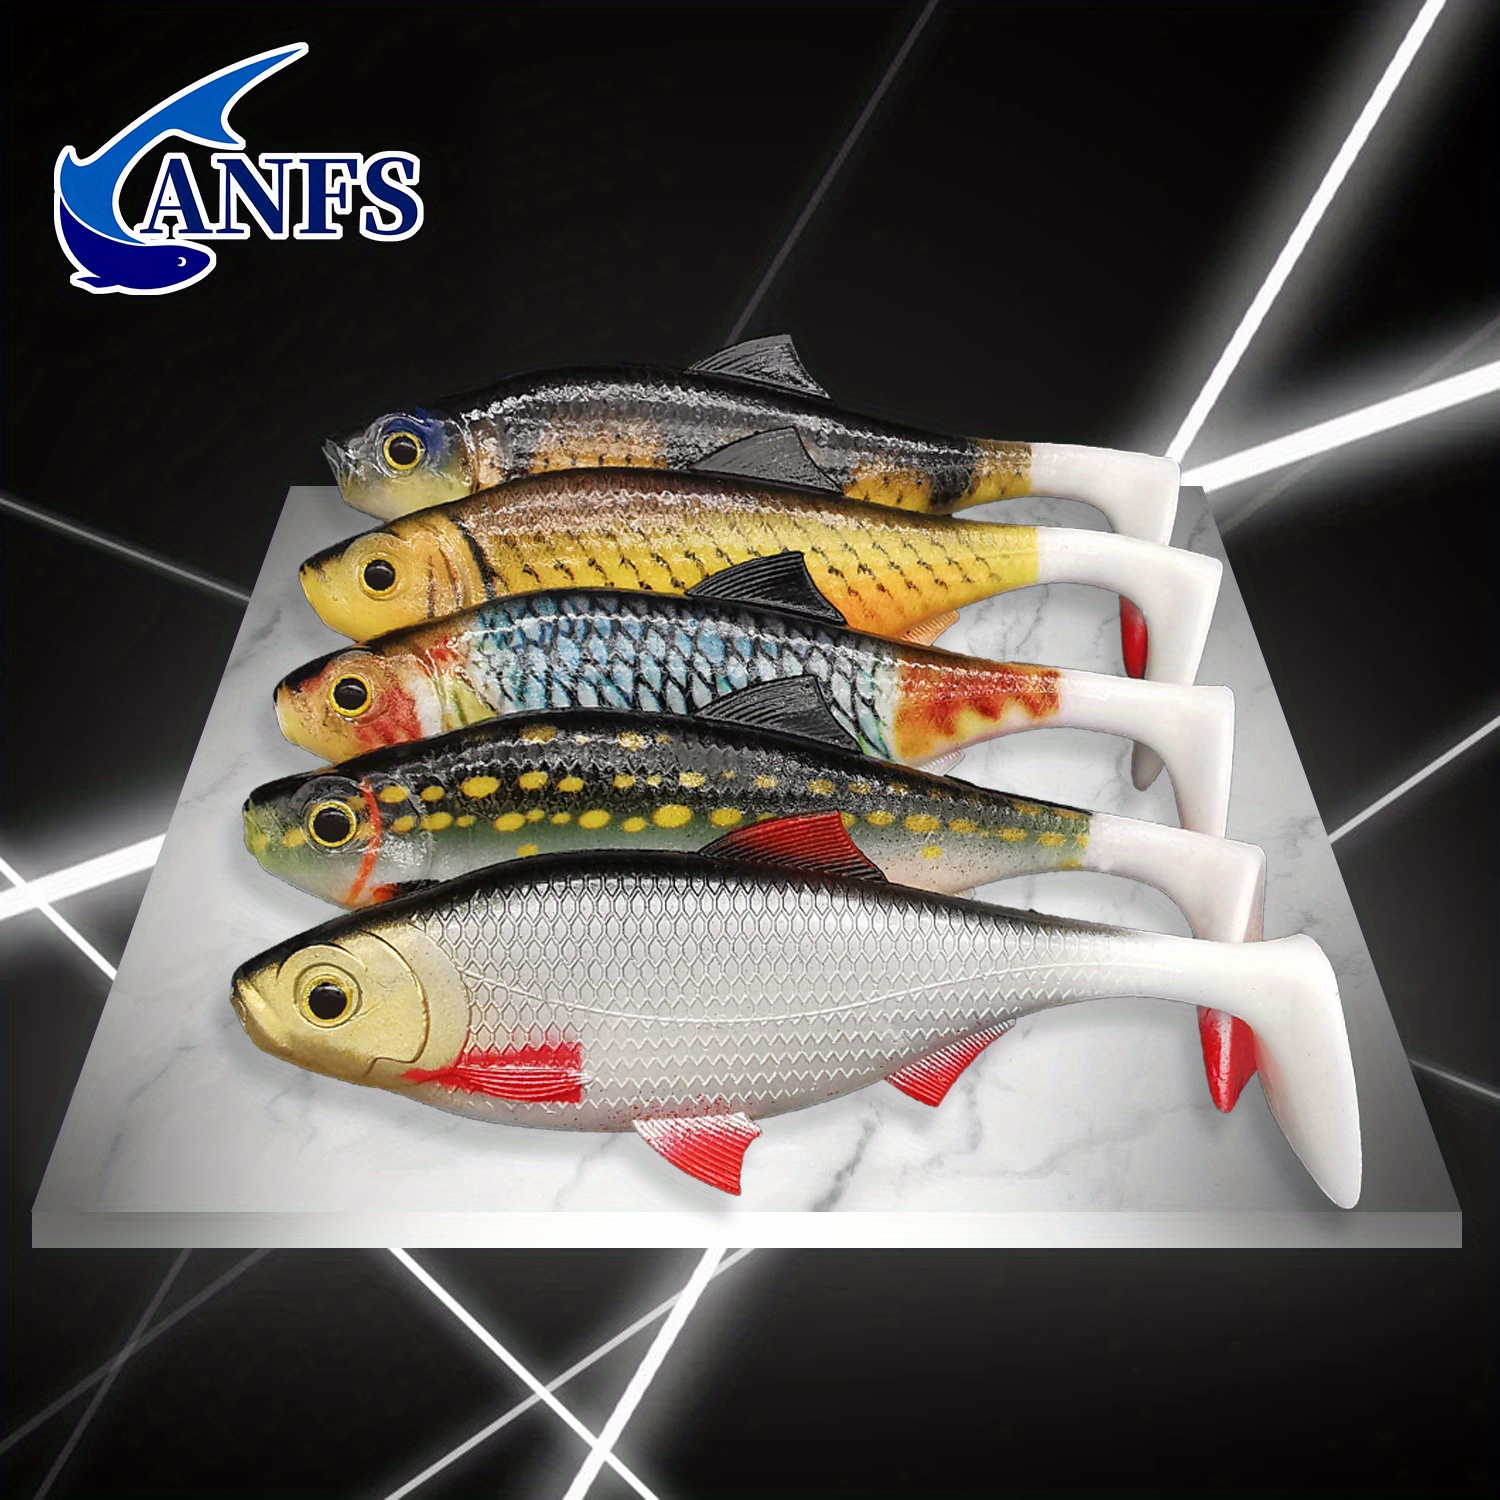 

Anfs 2-piece Soft Fishing Lures, 5.5" Pvc Artificial Bait For Shad, Pike, Perch, Zander & Catfish - Lead-free Tackle